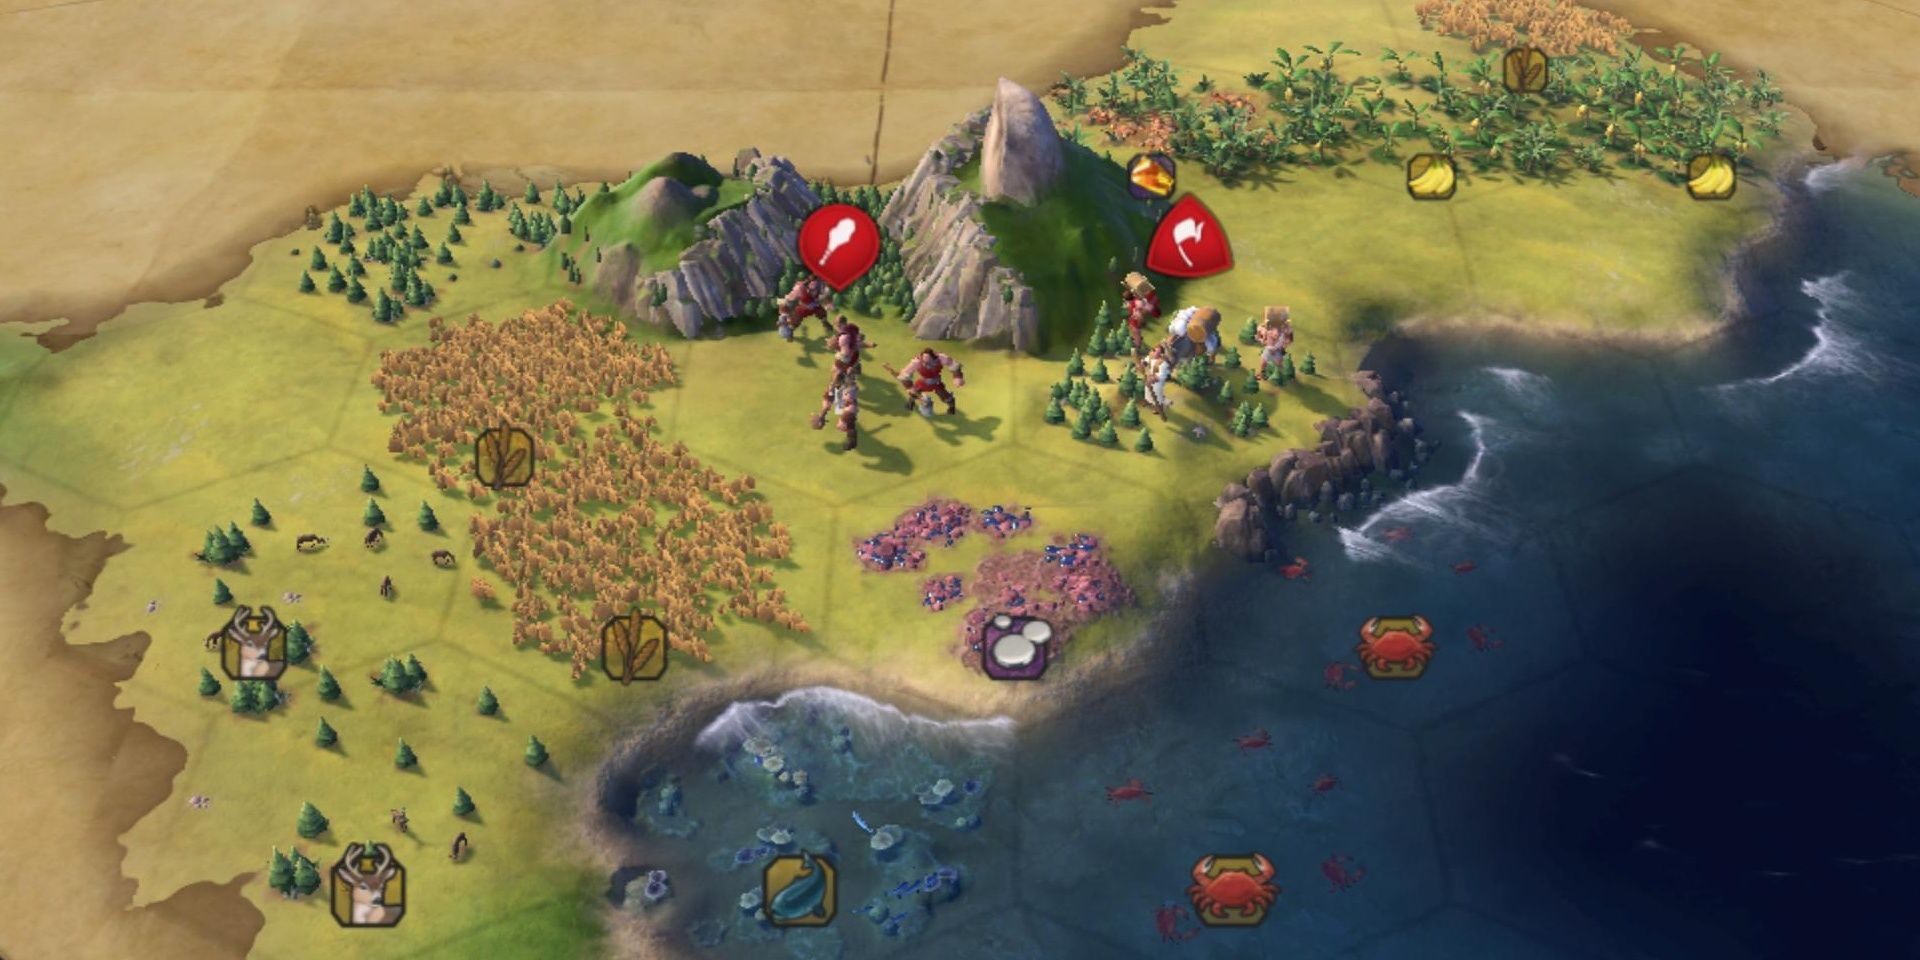 Civilization 6 Starting Position With Plentiful Resources